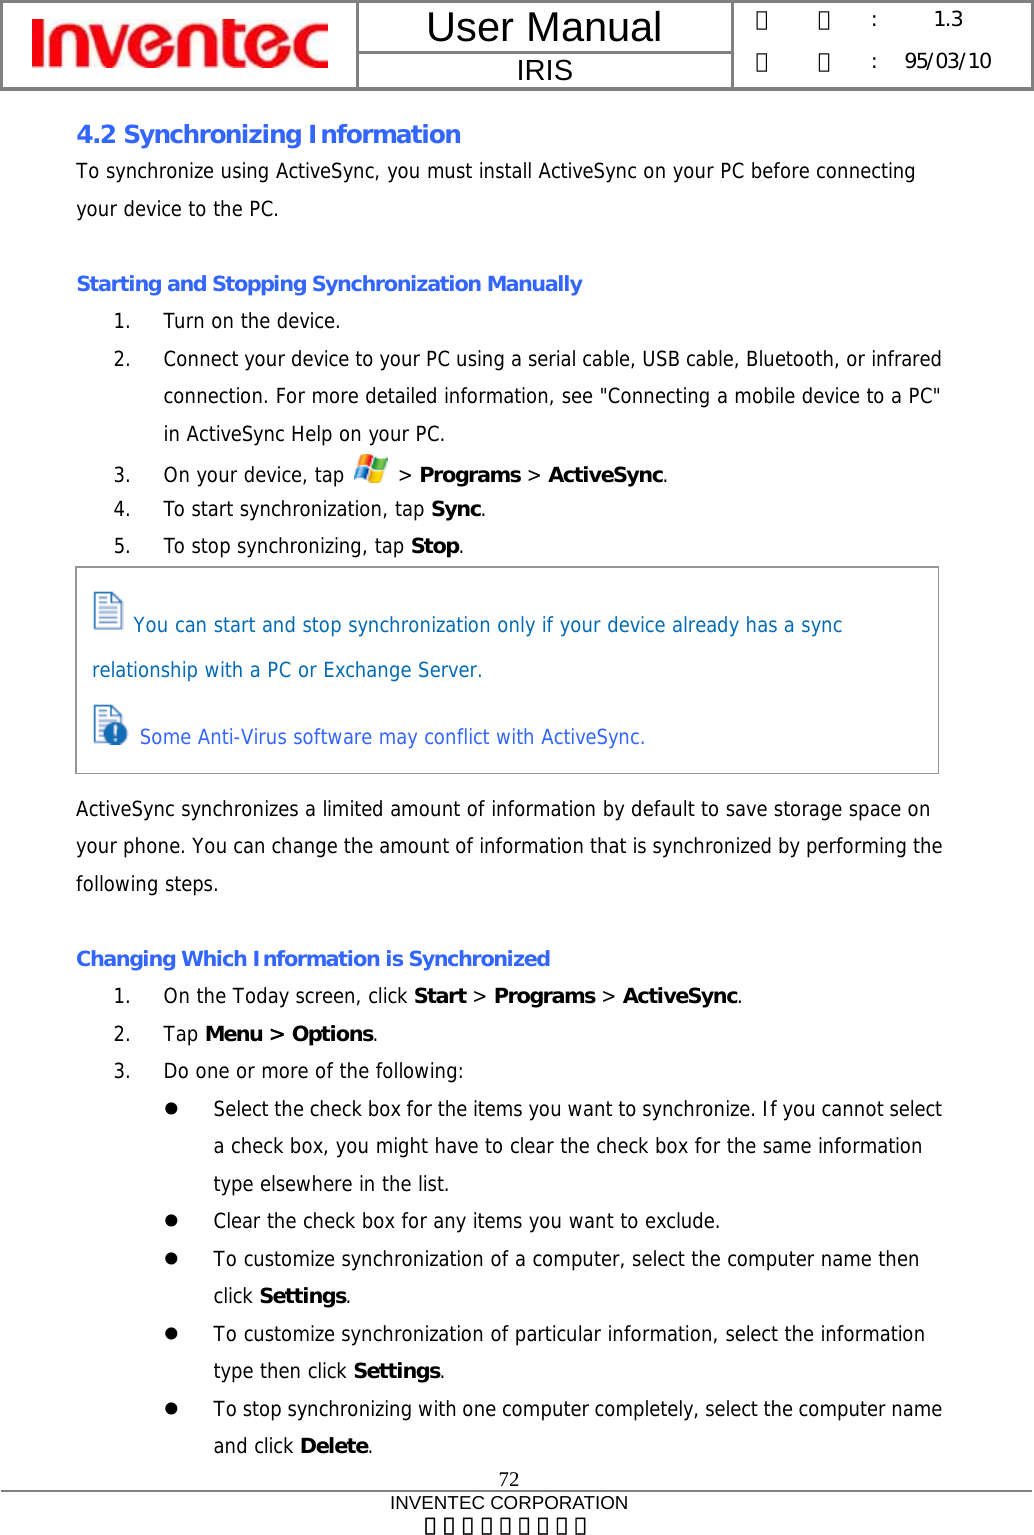 User Manual  IRIS 版    本 :  1.3 日    期 : 95/03/10  72 INVENTEC CORPORATION 英業達股份有限公司  4.2 Synchronizing Information To synchronize using ActiveSync, you must install ActiveSync on your PC before connecting your device to the PC.  Starting and Stopping Synchronization Manually 1. Turn on the device. 2. Connect your device to your PC using a serial cable, USB cable, Bluetooth, or infrared connection. For more detailed information, see &quot;Connecting a mobile device to a PC&quot; in ActiveSync Help on your PC. 3. On your device, tap   &gt; Programs &gt; ActiveSync. 4. To start synchronization, tap Sync. 5. To stop synchronizing, tap Stop.       ActiveSync synchronizes a limited amount of information by default to save storage space on your phone. You can change the amount of information that is synchronized by performing the following steps.  Changing Which Information is Synchronized 1. On the Today screen, click Start &gt; Programs &gt; ActiveSync. 2. Tap Menu &gt; Options. 3. Do one or more of the following: z Select the check box for the items you want to synchronize. If you cannot select a check box, you might have to clear the check box for the same information type elsewhere in the list. z Clear the check box for any items you want to exclude. z To customize synchronization of a computer, select the computer name then click Settings.  z To customize synchronization of particular information, select the information type then click Settings. z To stop synchronizing with one computer completely, select the computer name and click Delete.  You can start and stop synchronization only if your device already has a sync relationship with a PC or Exchange Server.  Some Anti-Virus software may conflict with ActiveSync. 